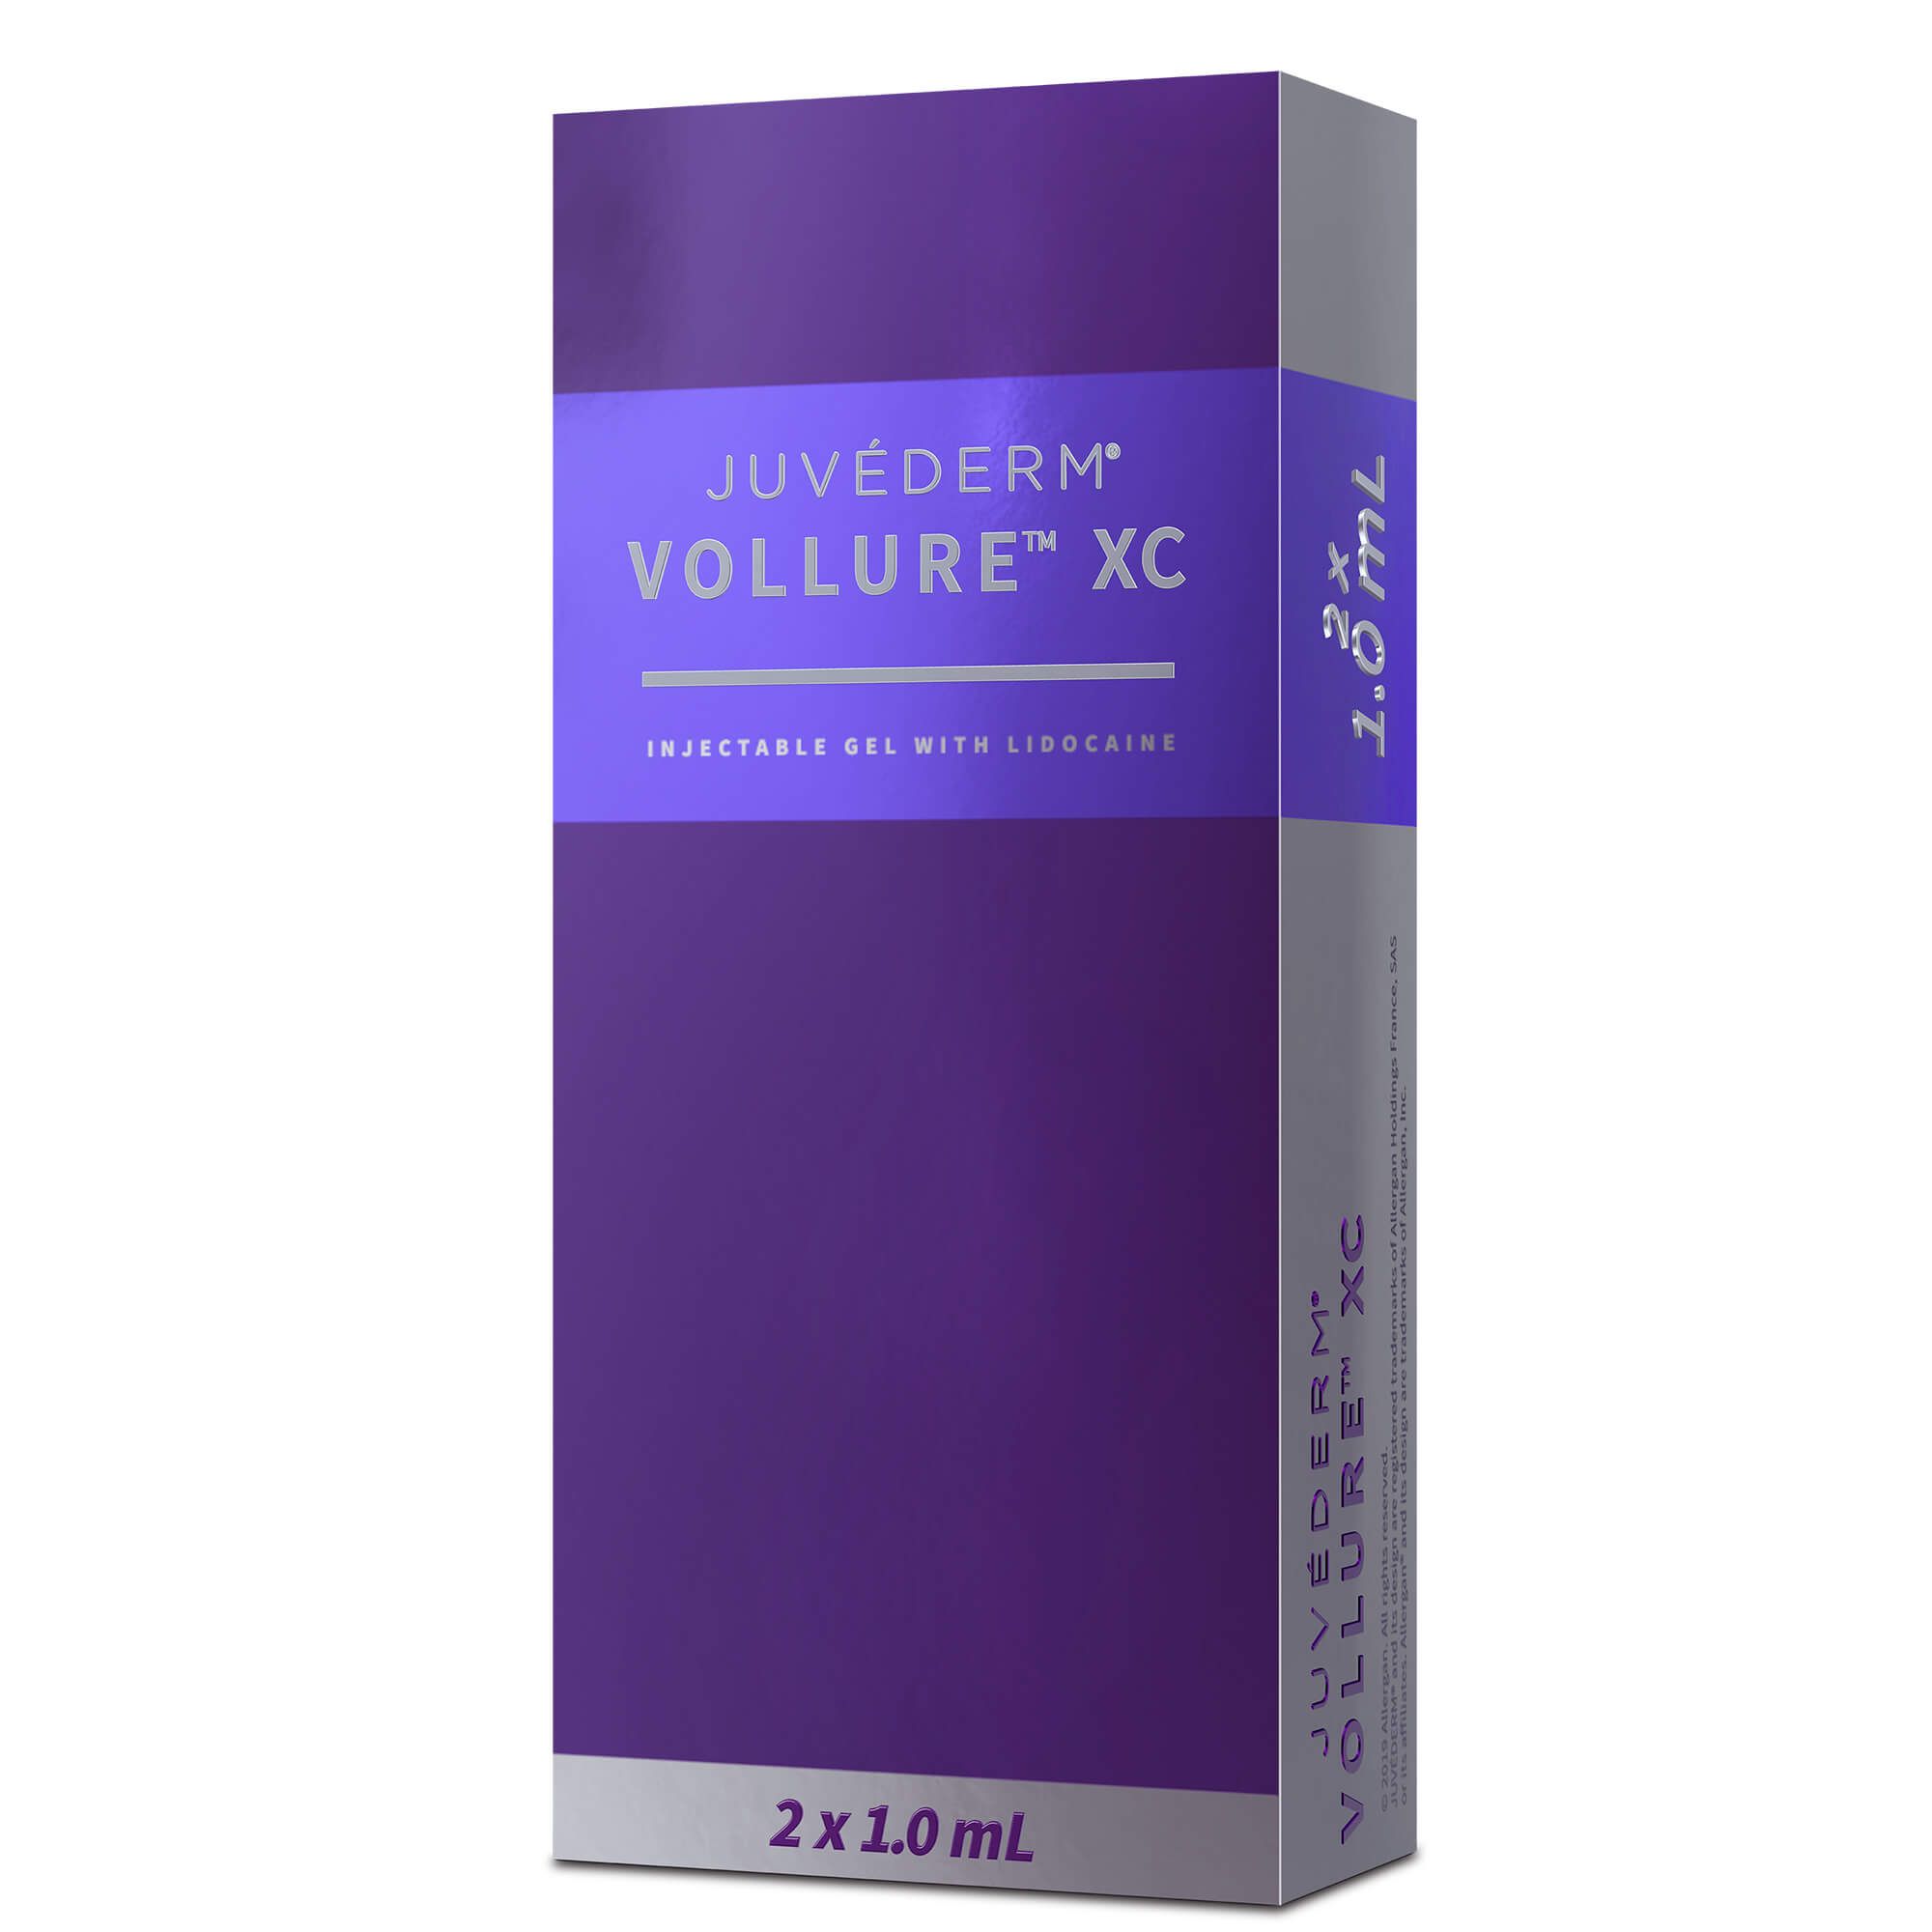 Juvederm product